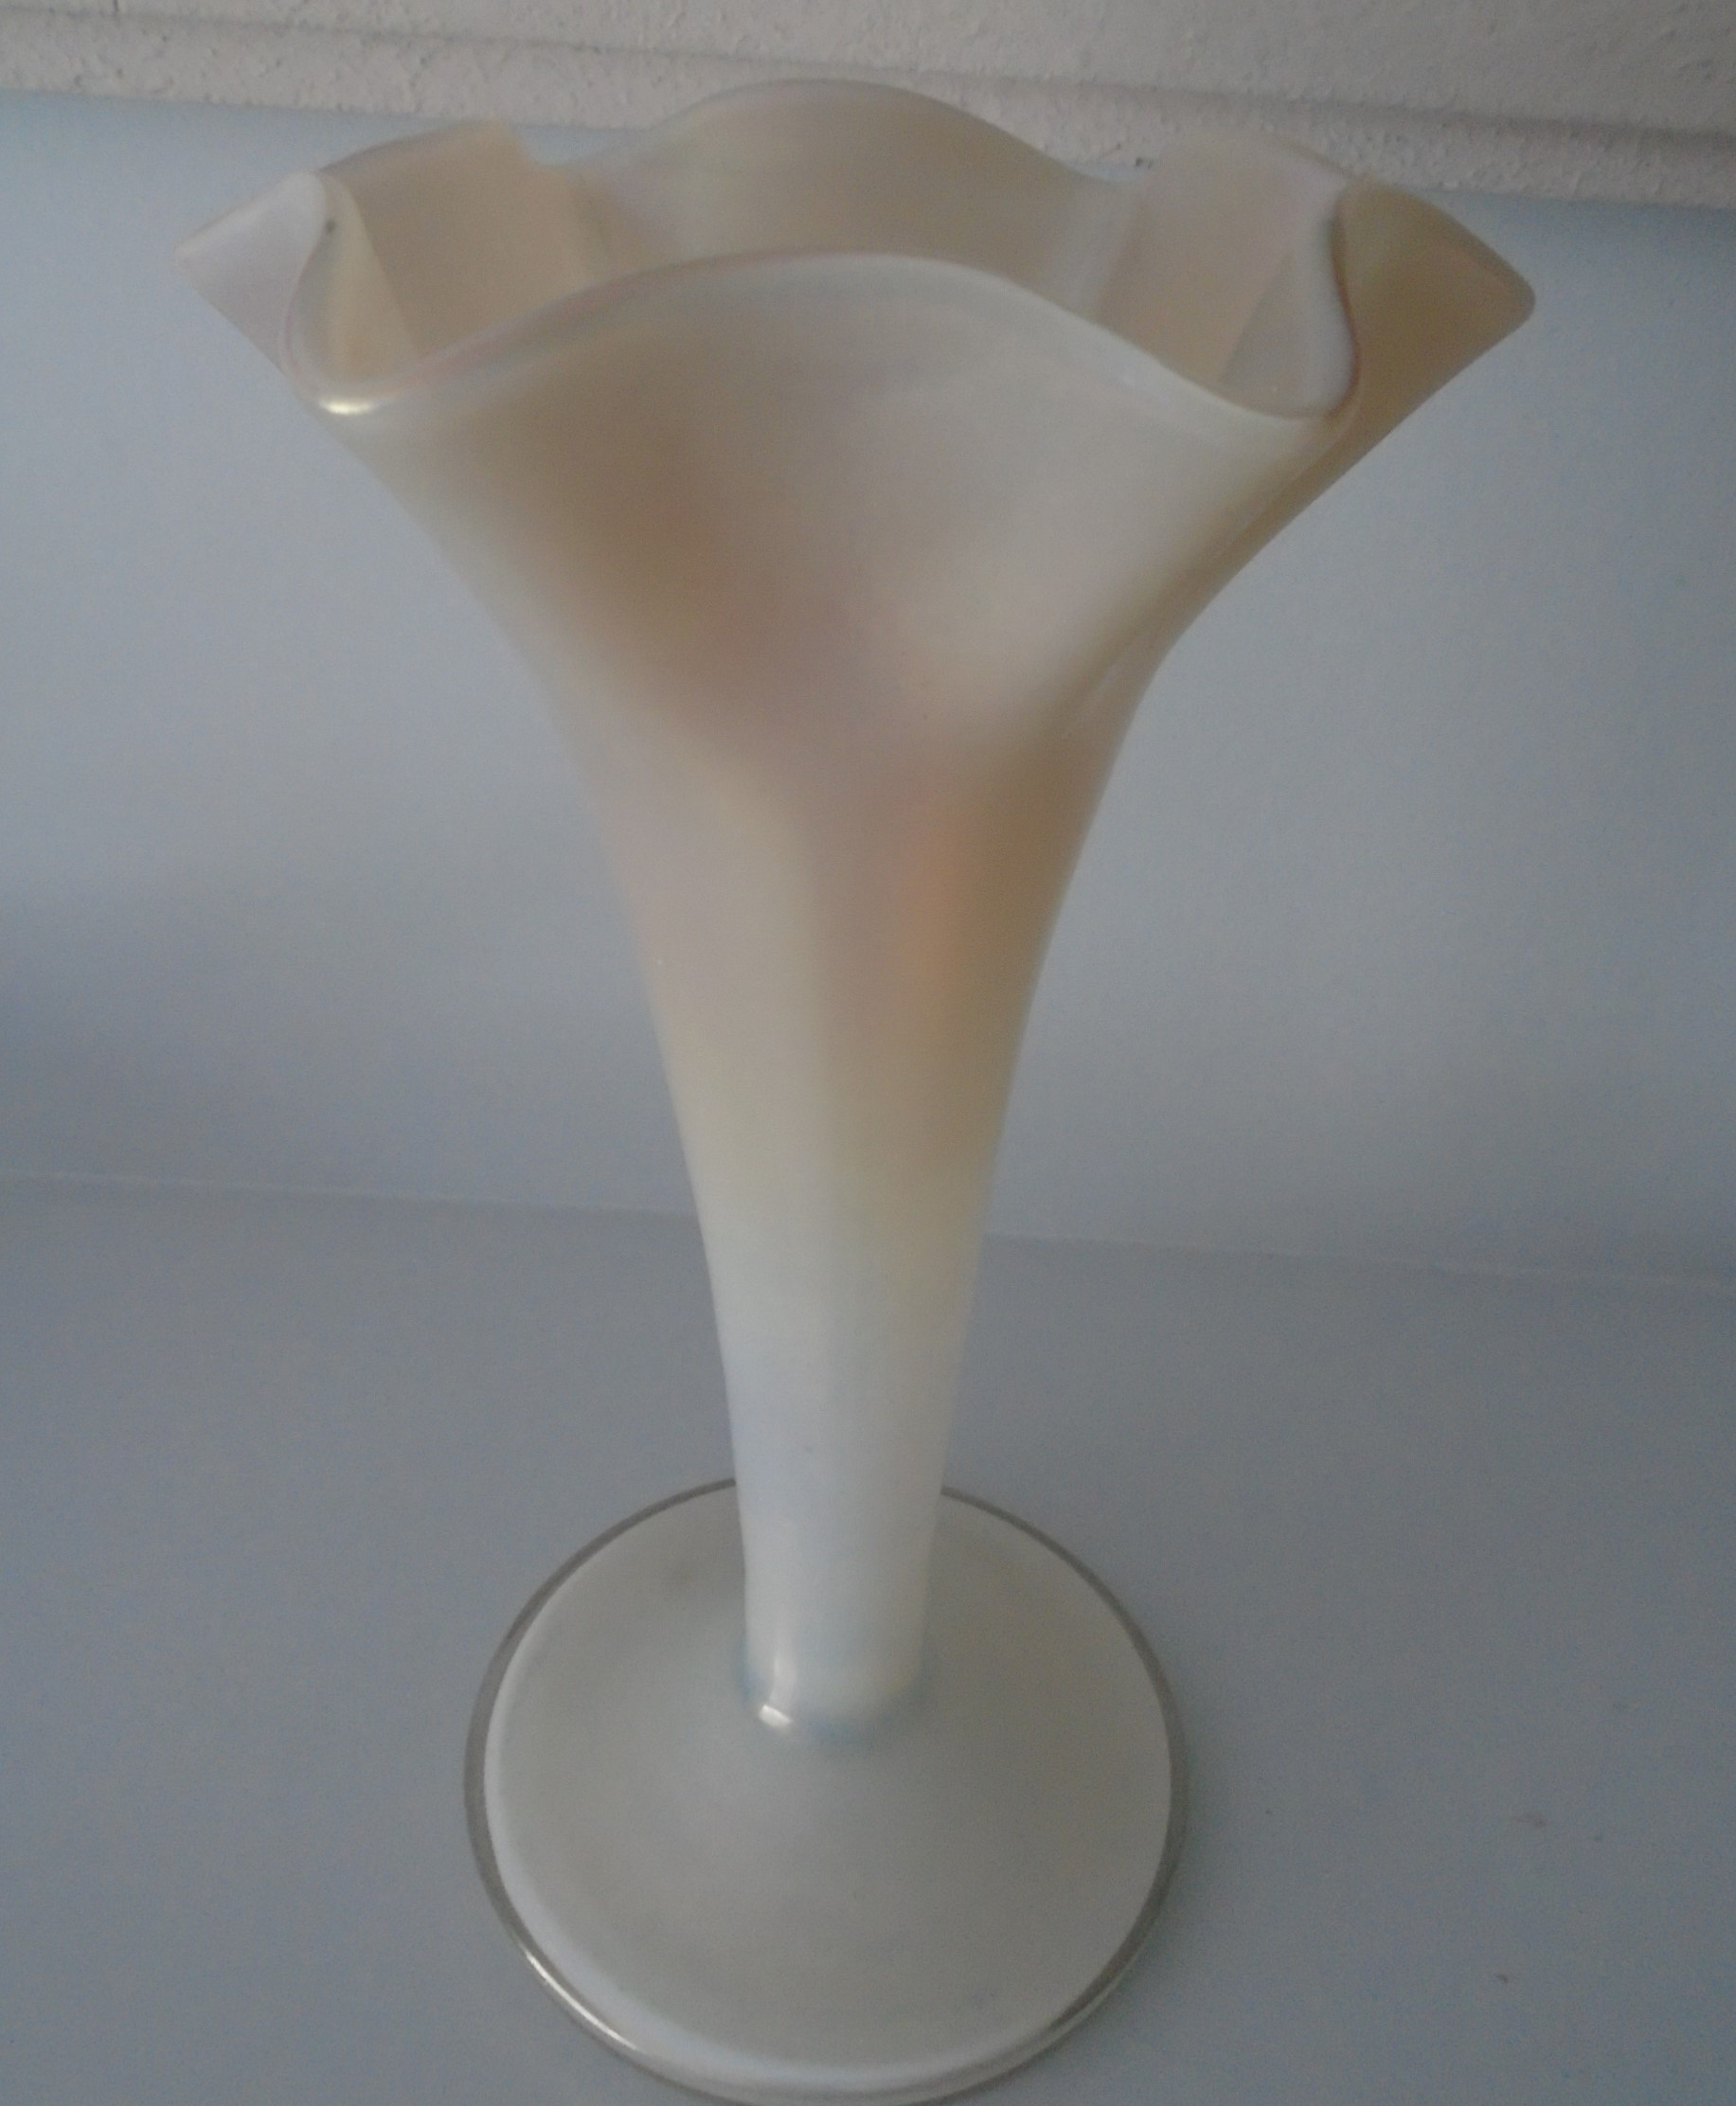 Fine example of a late 19th century Bohemian Art Nouveau mother of pearl glass trumpet vase from glass maker KRALIK.